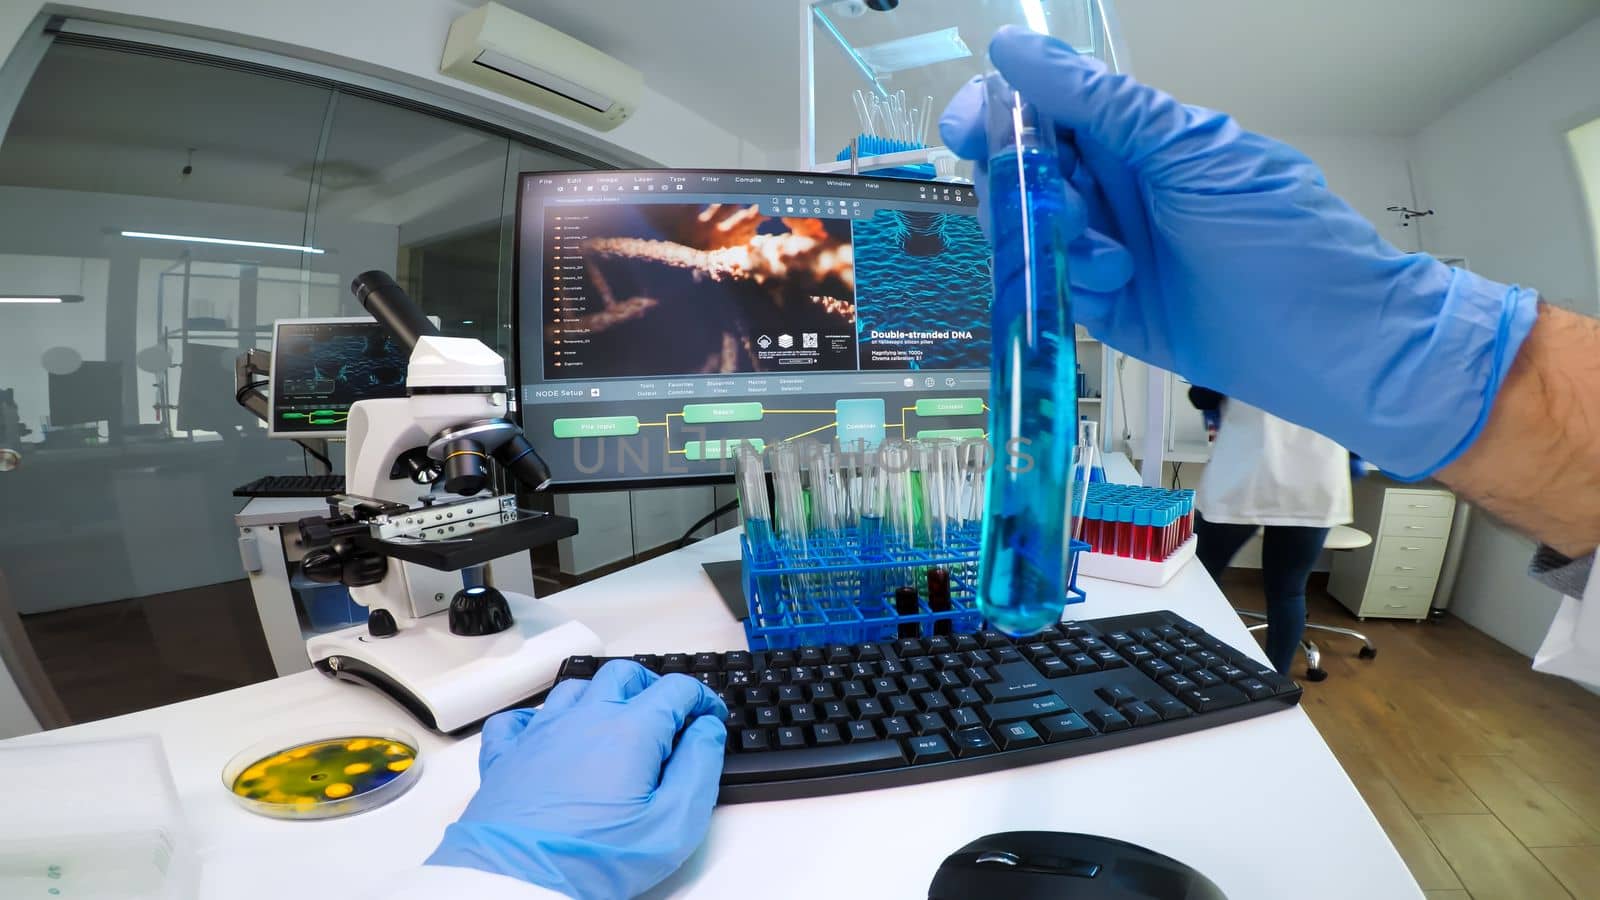 POV of doctor researcher holding an ampoule of coronavirus vaccine looking into test tube. Scientists examining vaccine evolution in medical lab using high tech chemistry tools for scientific research